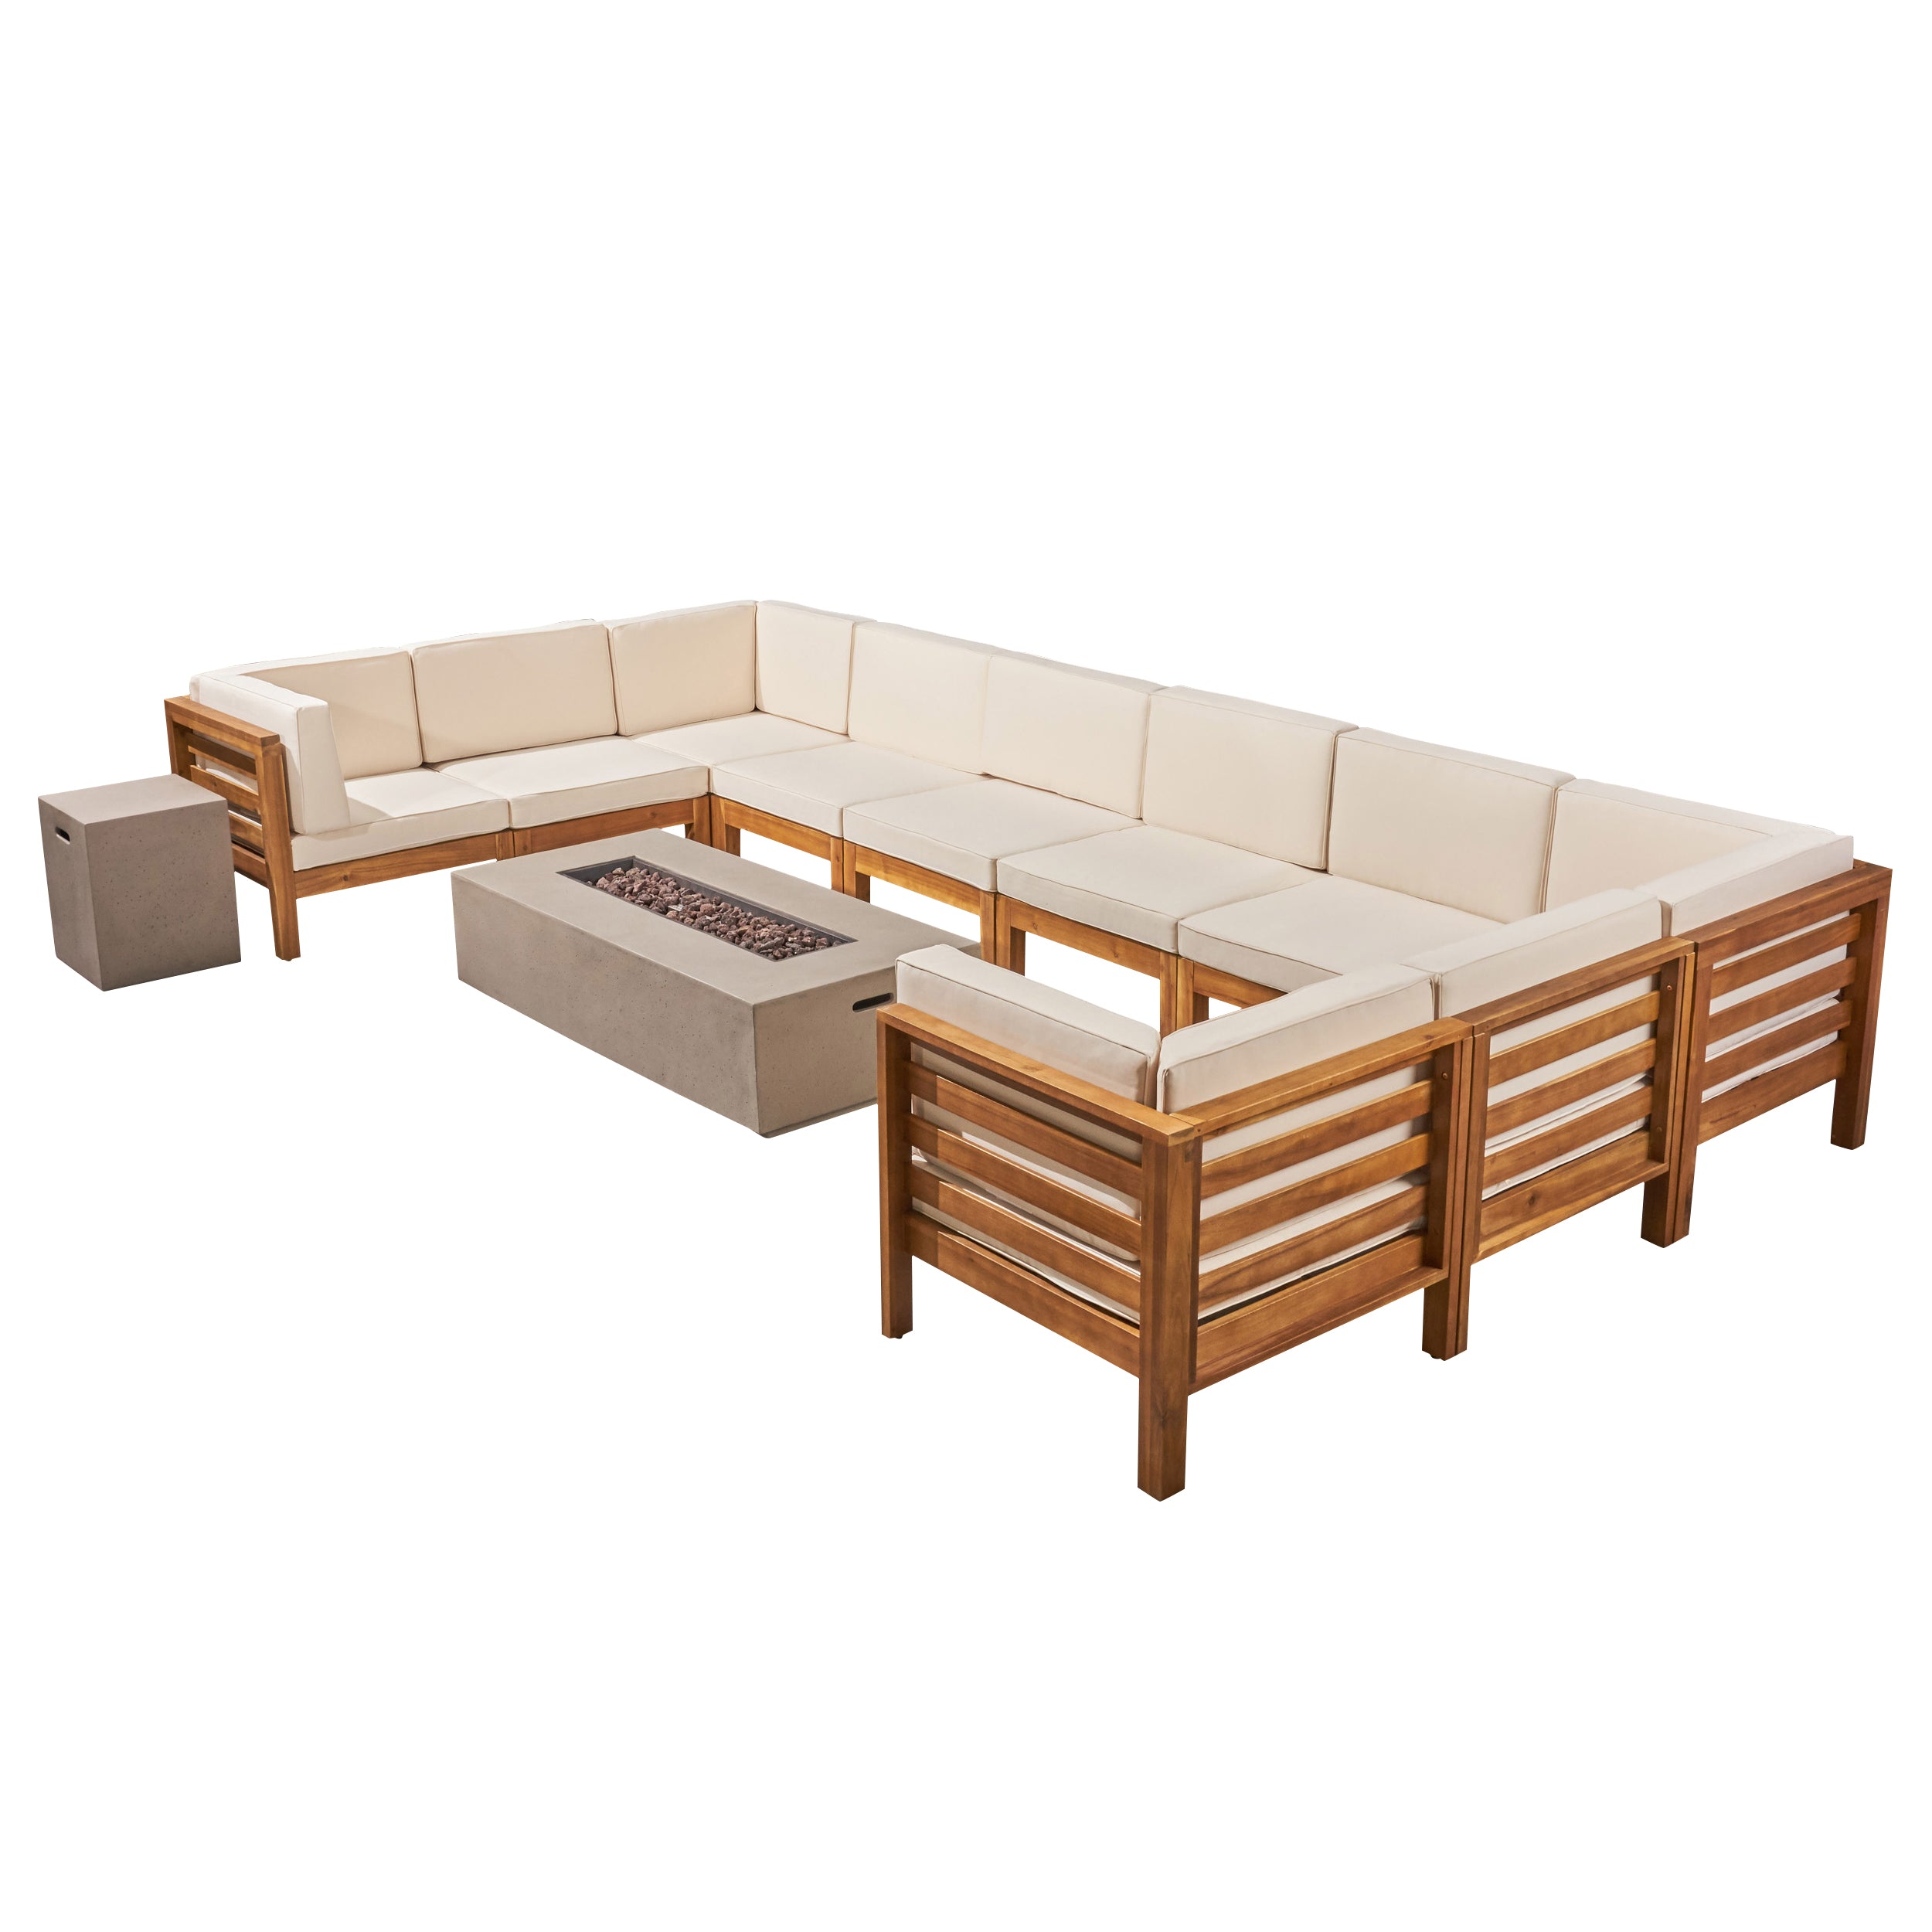 Ravello Outdoor 12 Piece U Shaped Sectional Sofa Set with Fire Pit Teak Beige Light Gray